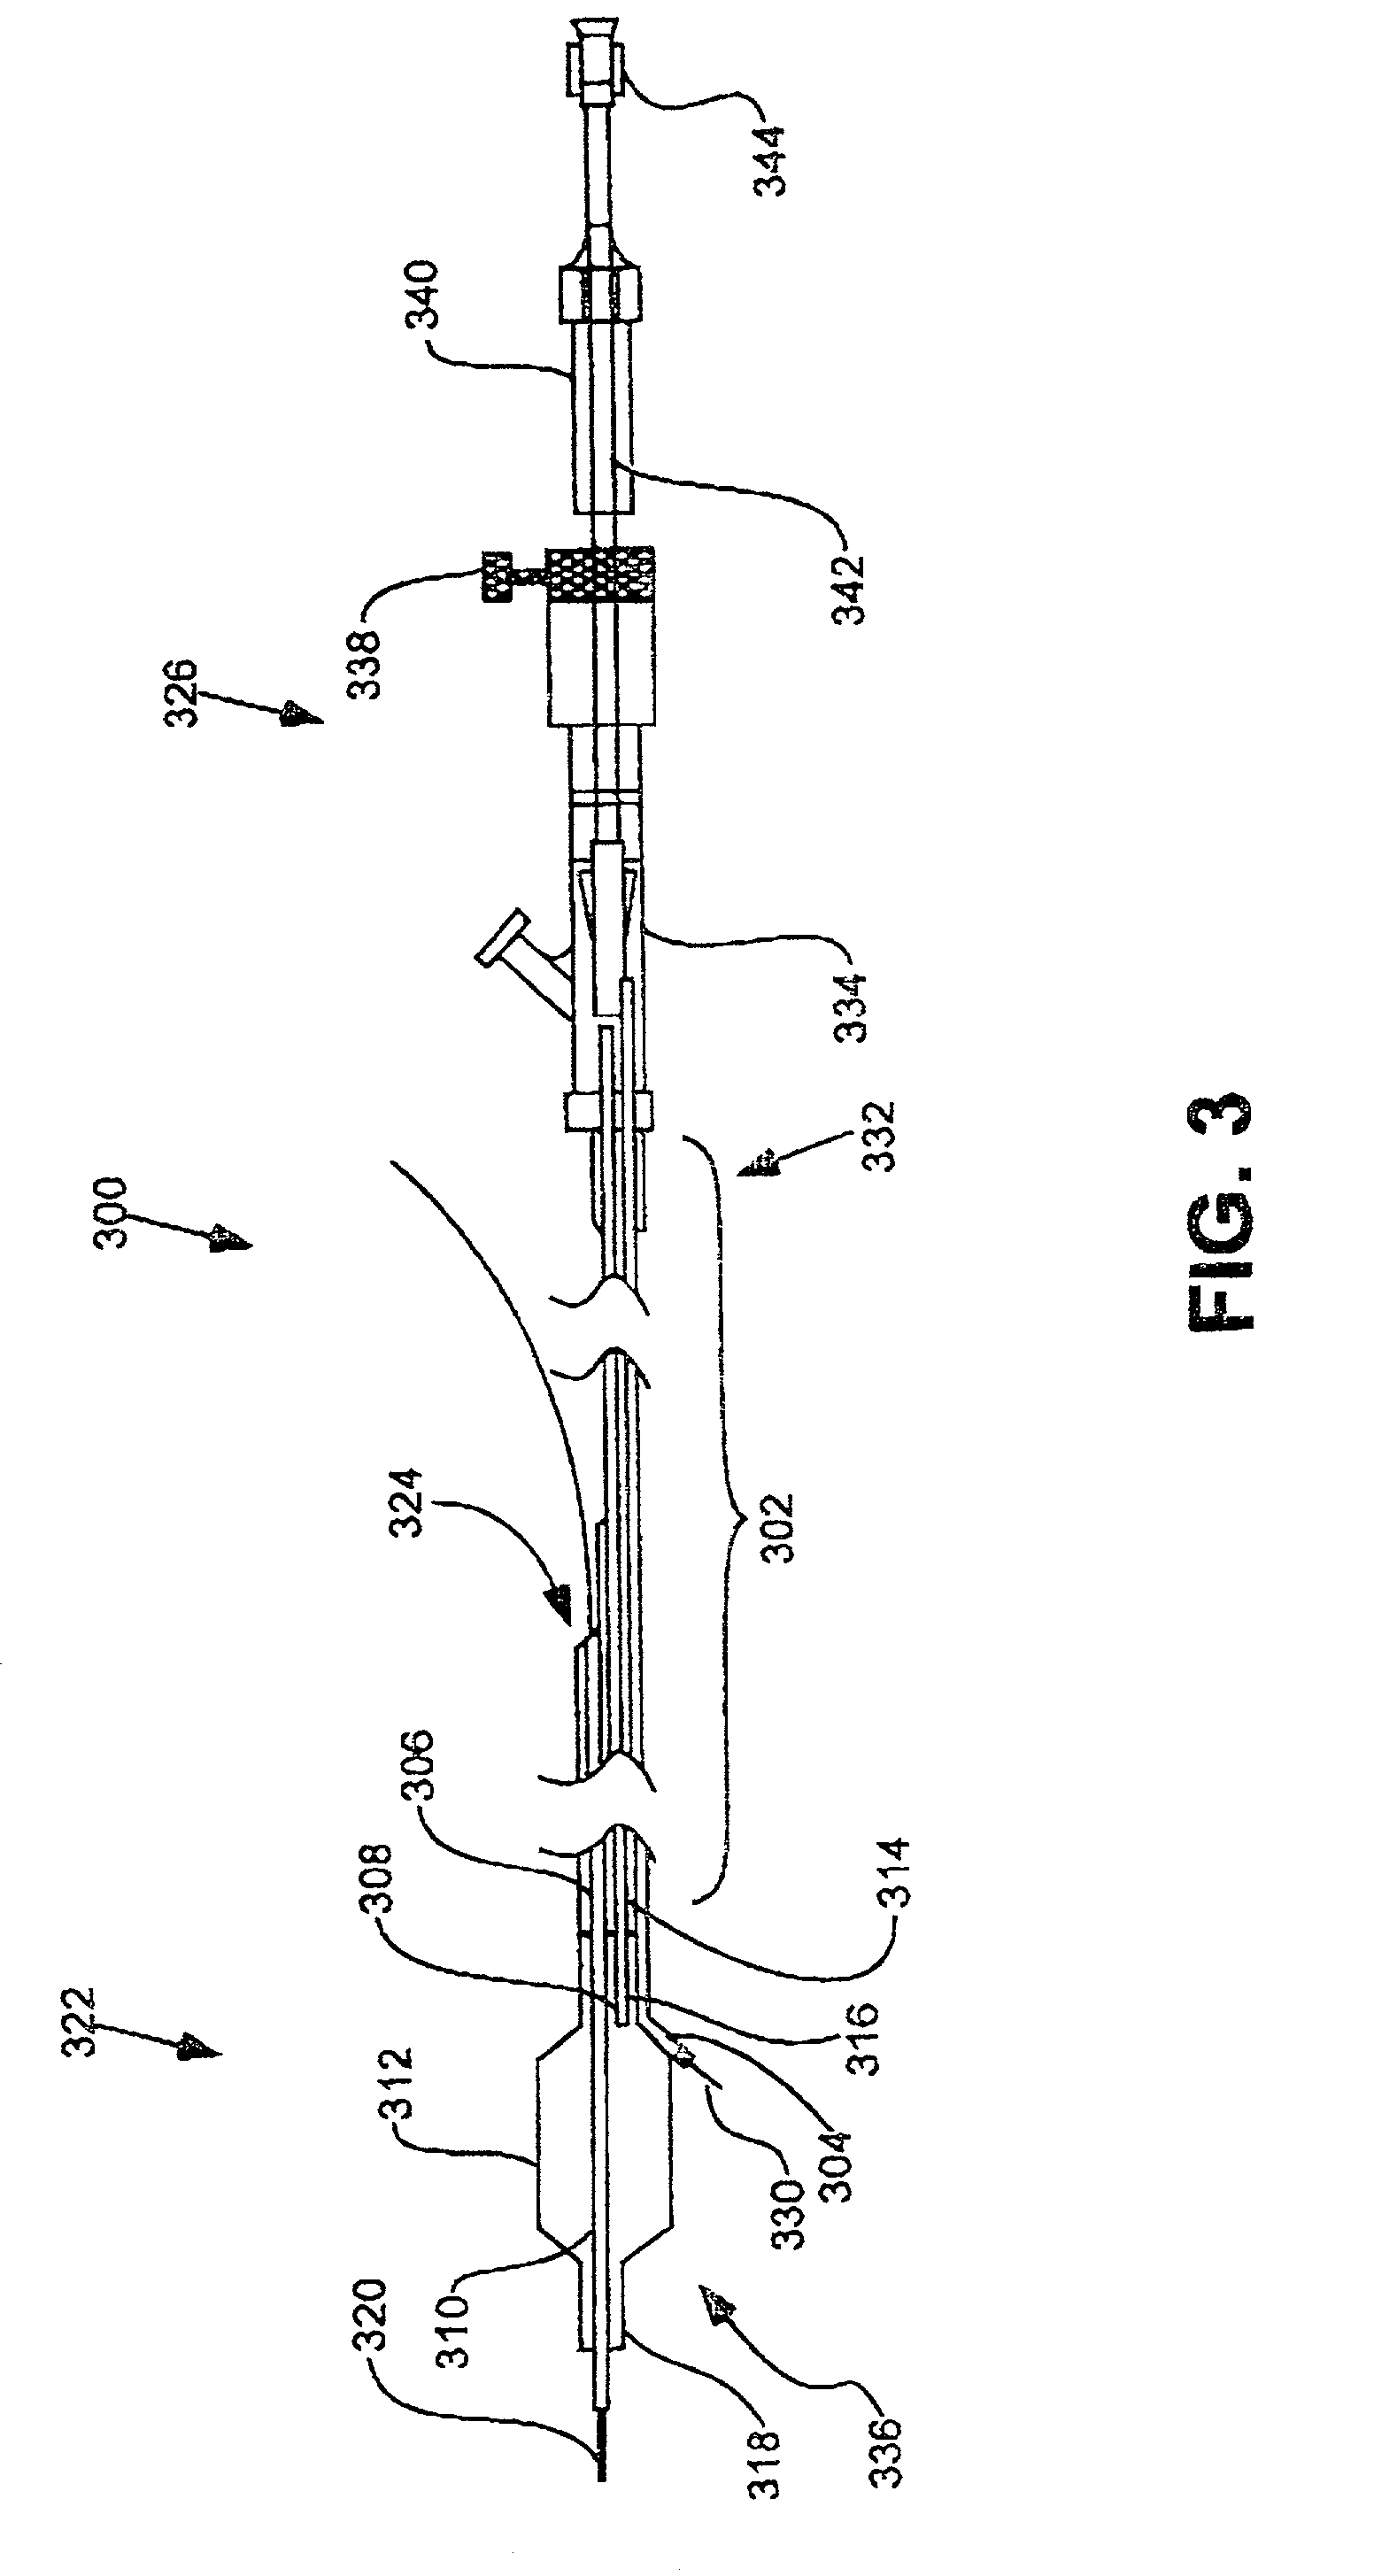 Contact and penetration depth sensor for a needle assembly